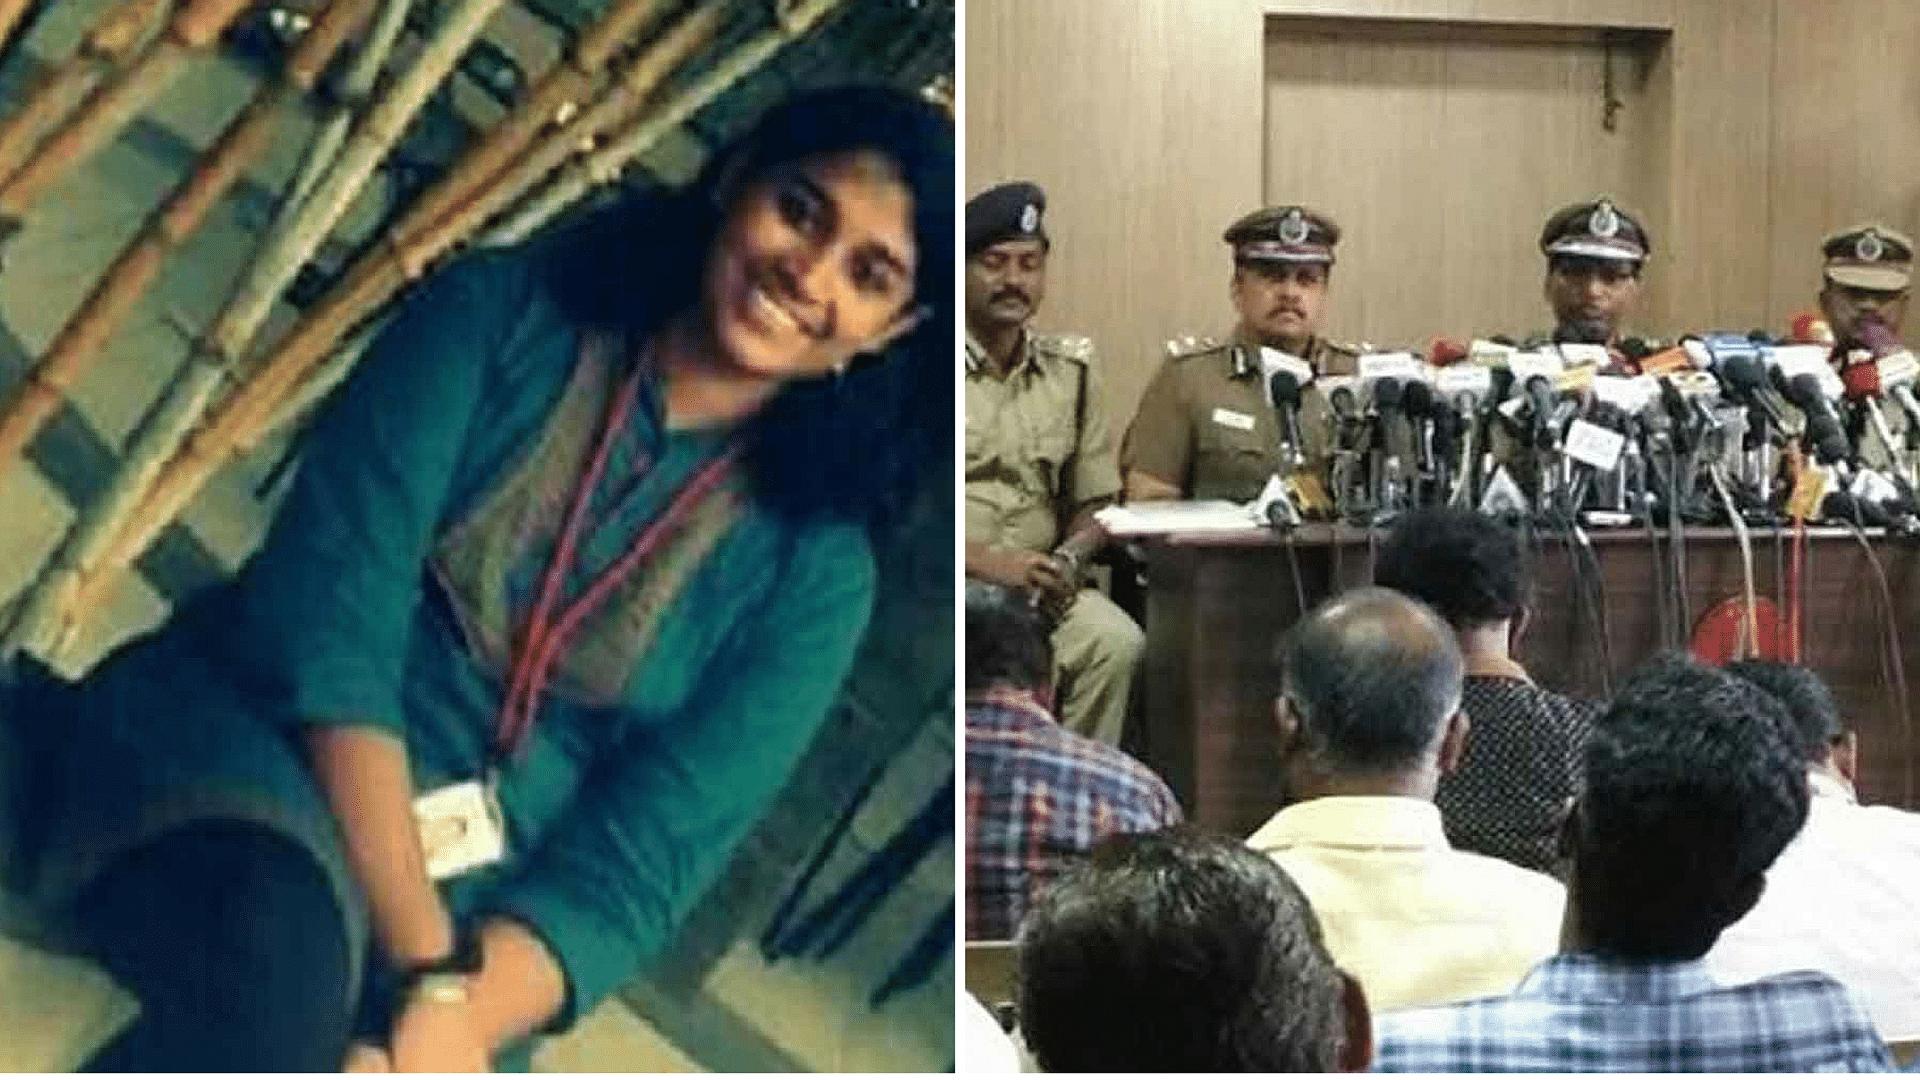 The Tamil Nadu cops reveal more details about Swathi’s murder case. (Photo Courtesy: The News Minute)